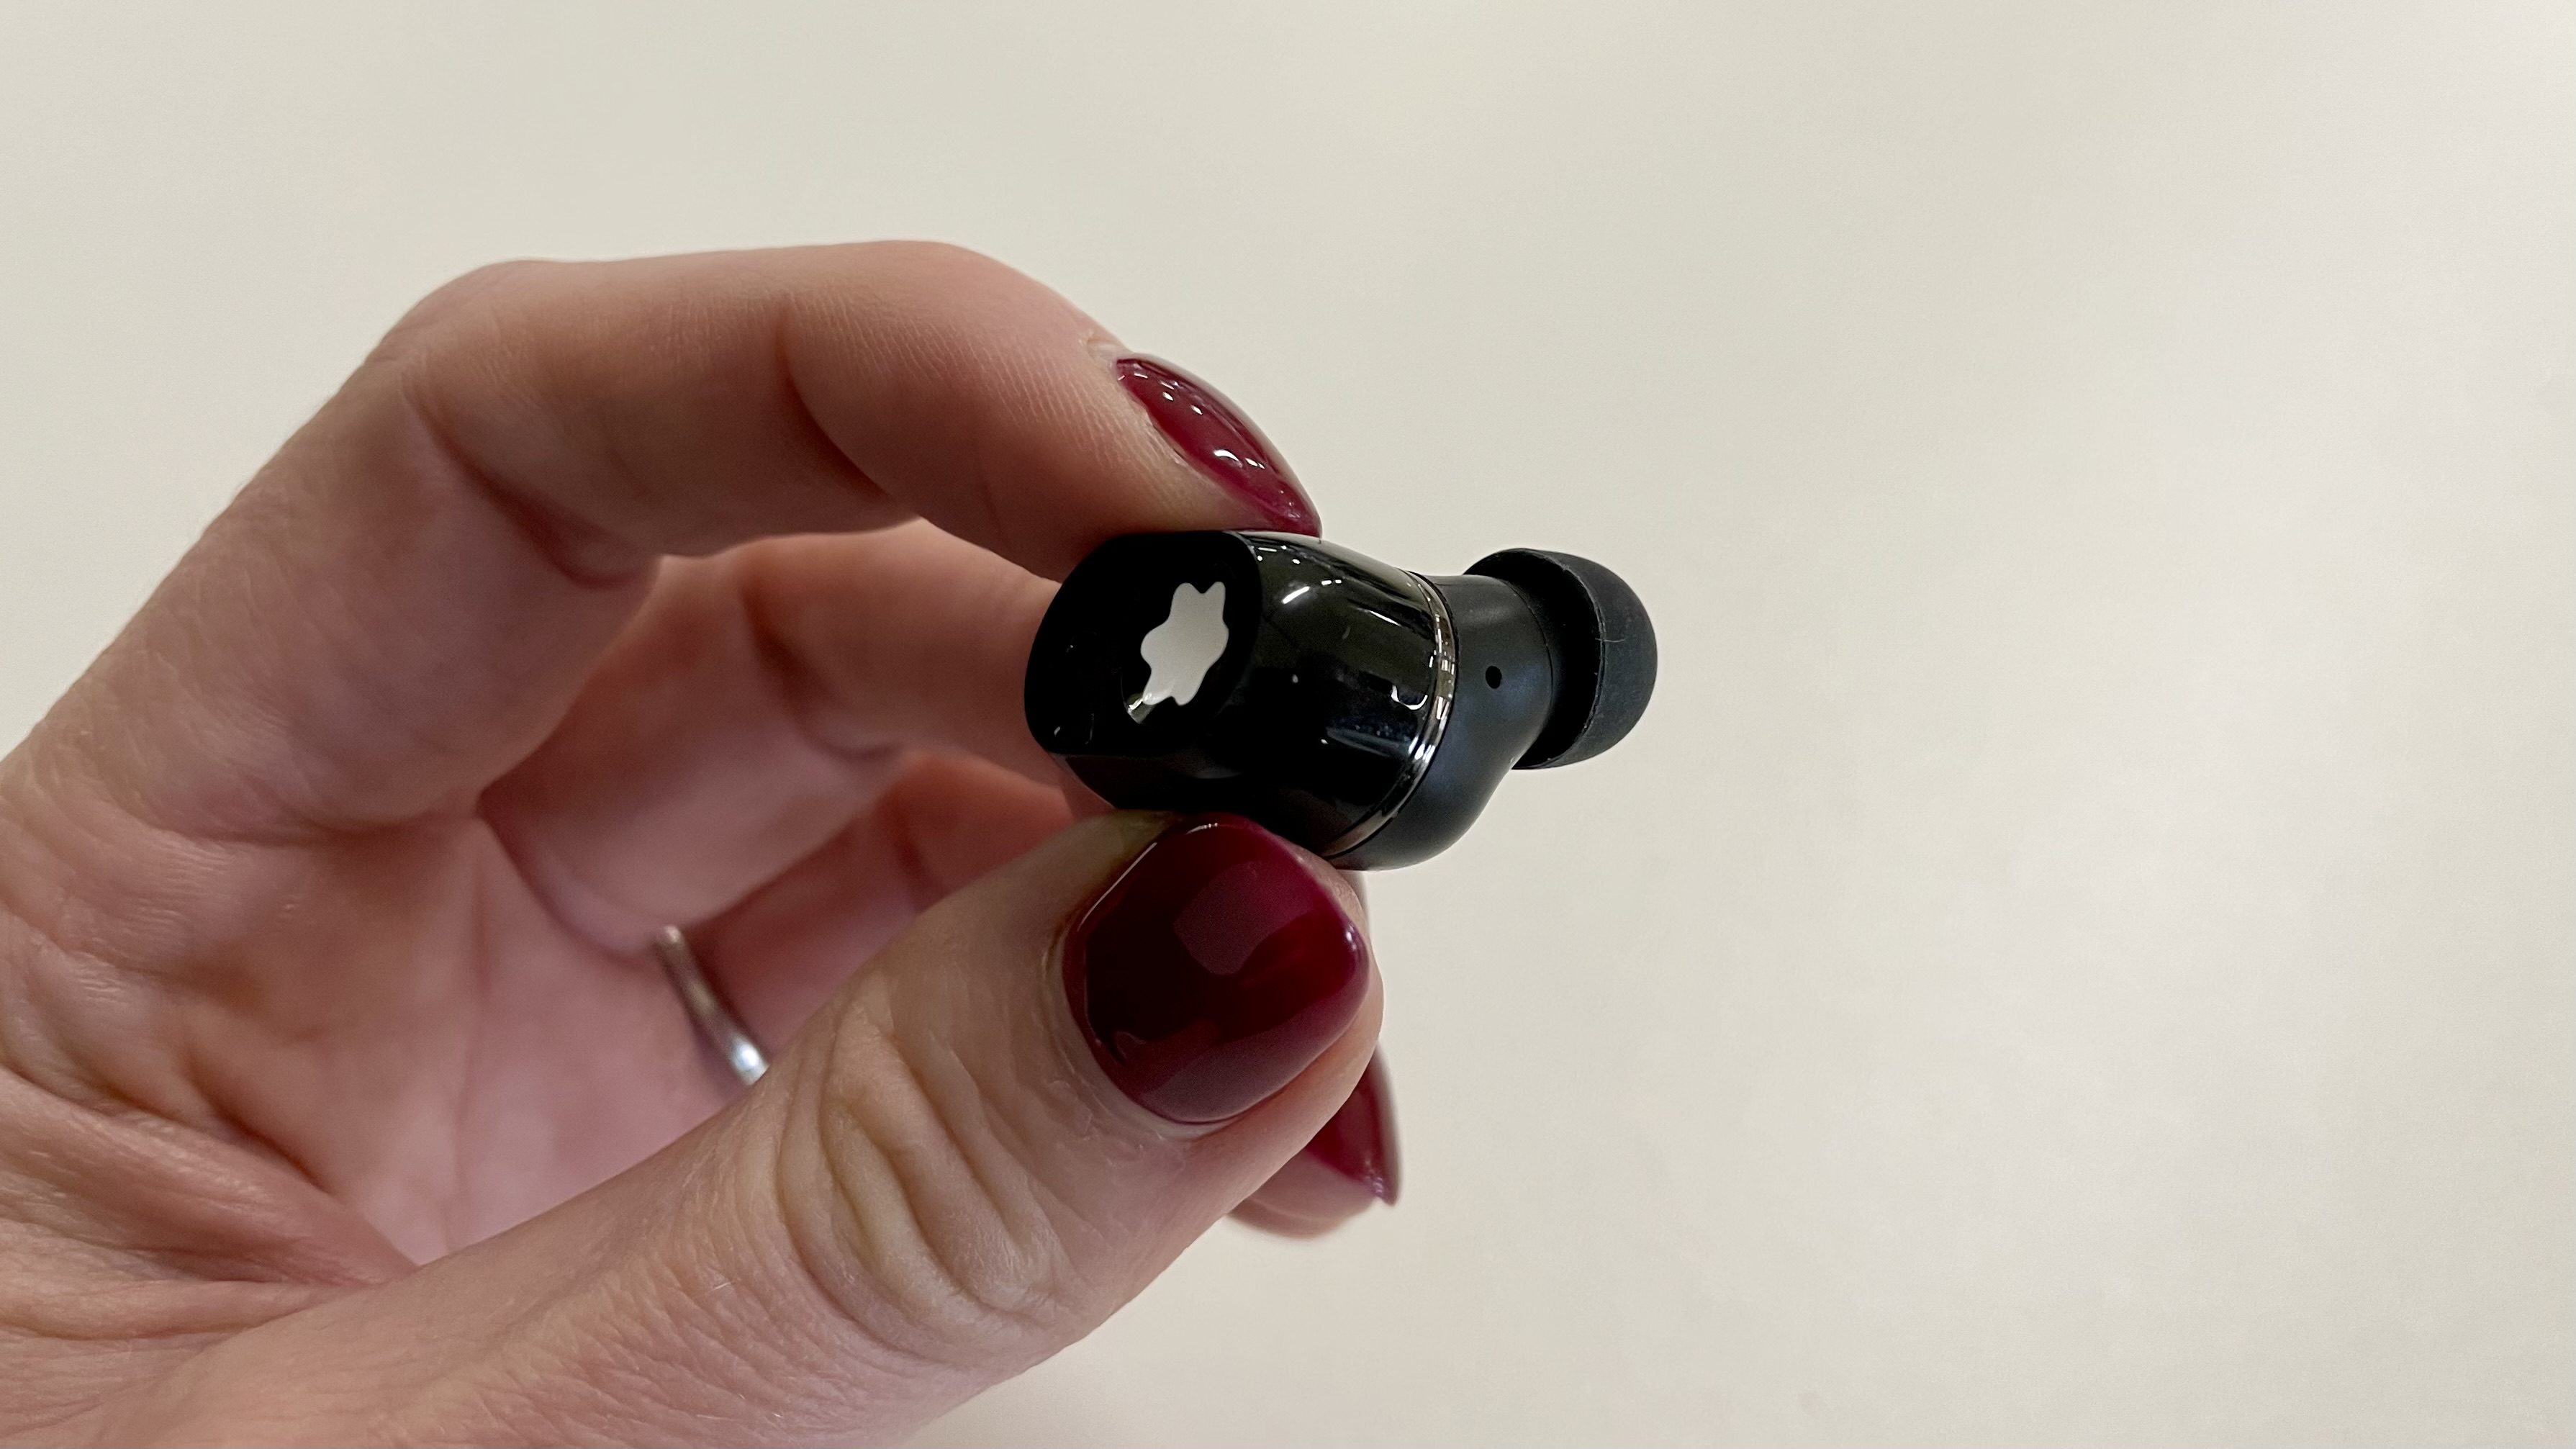 Montblanc MTB 03 earbud held in a hand